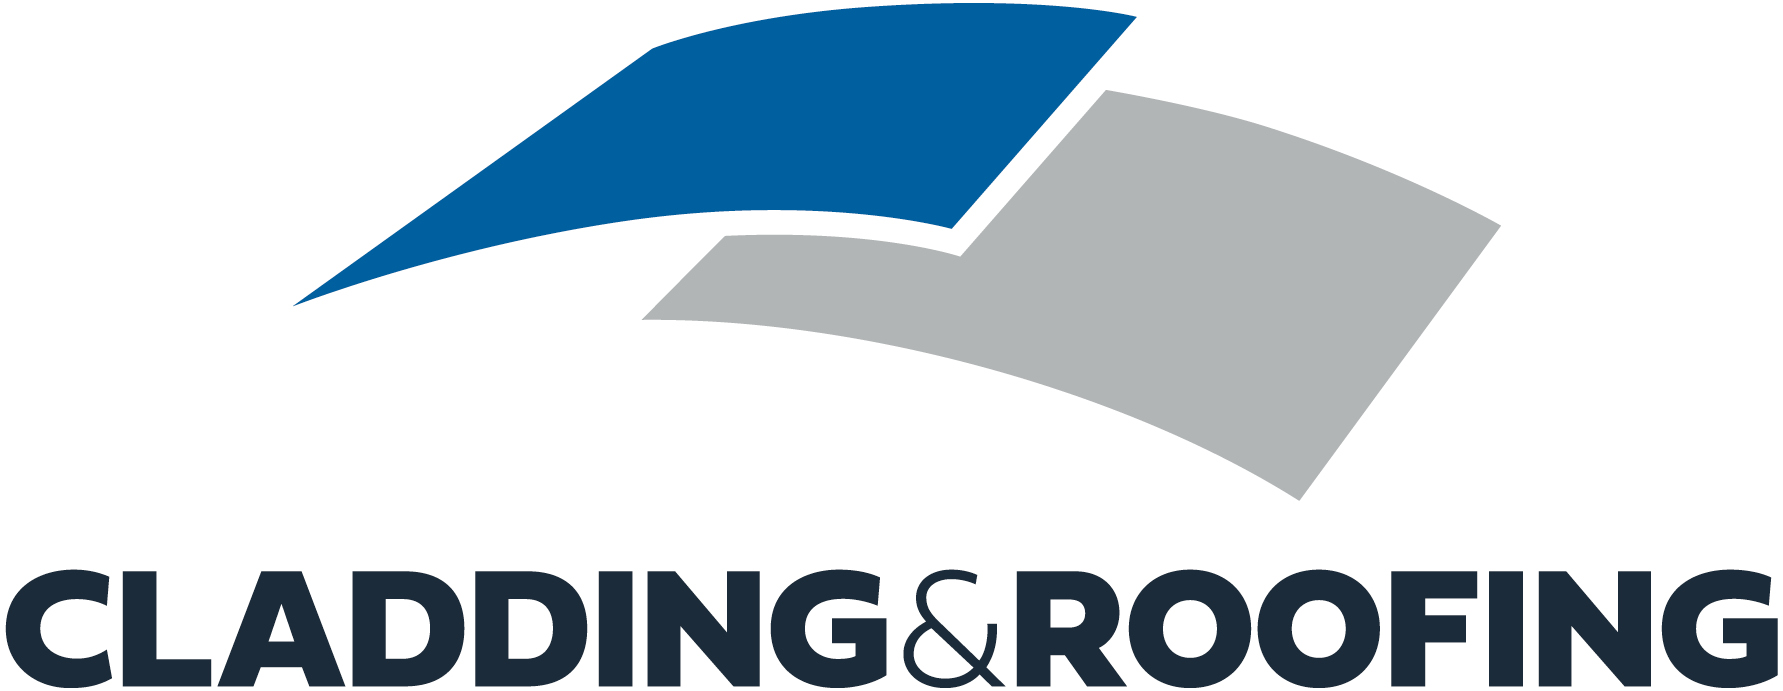 CLADDING&ROOFING